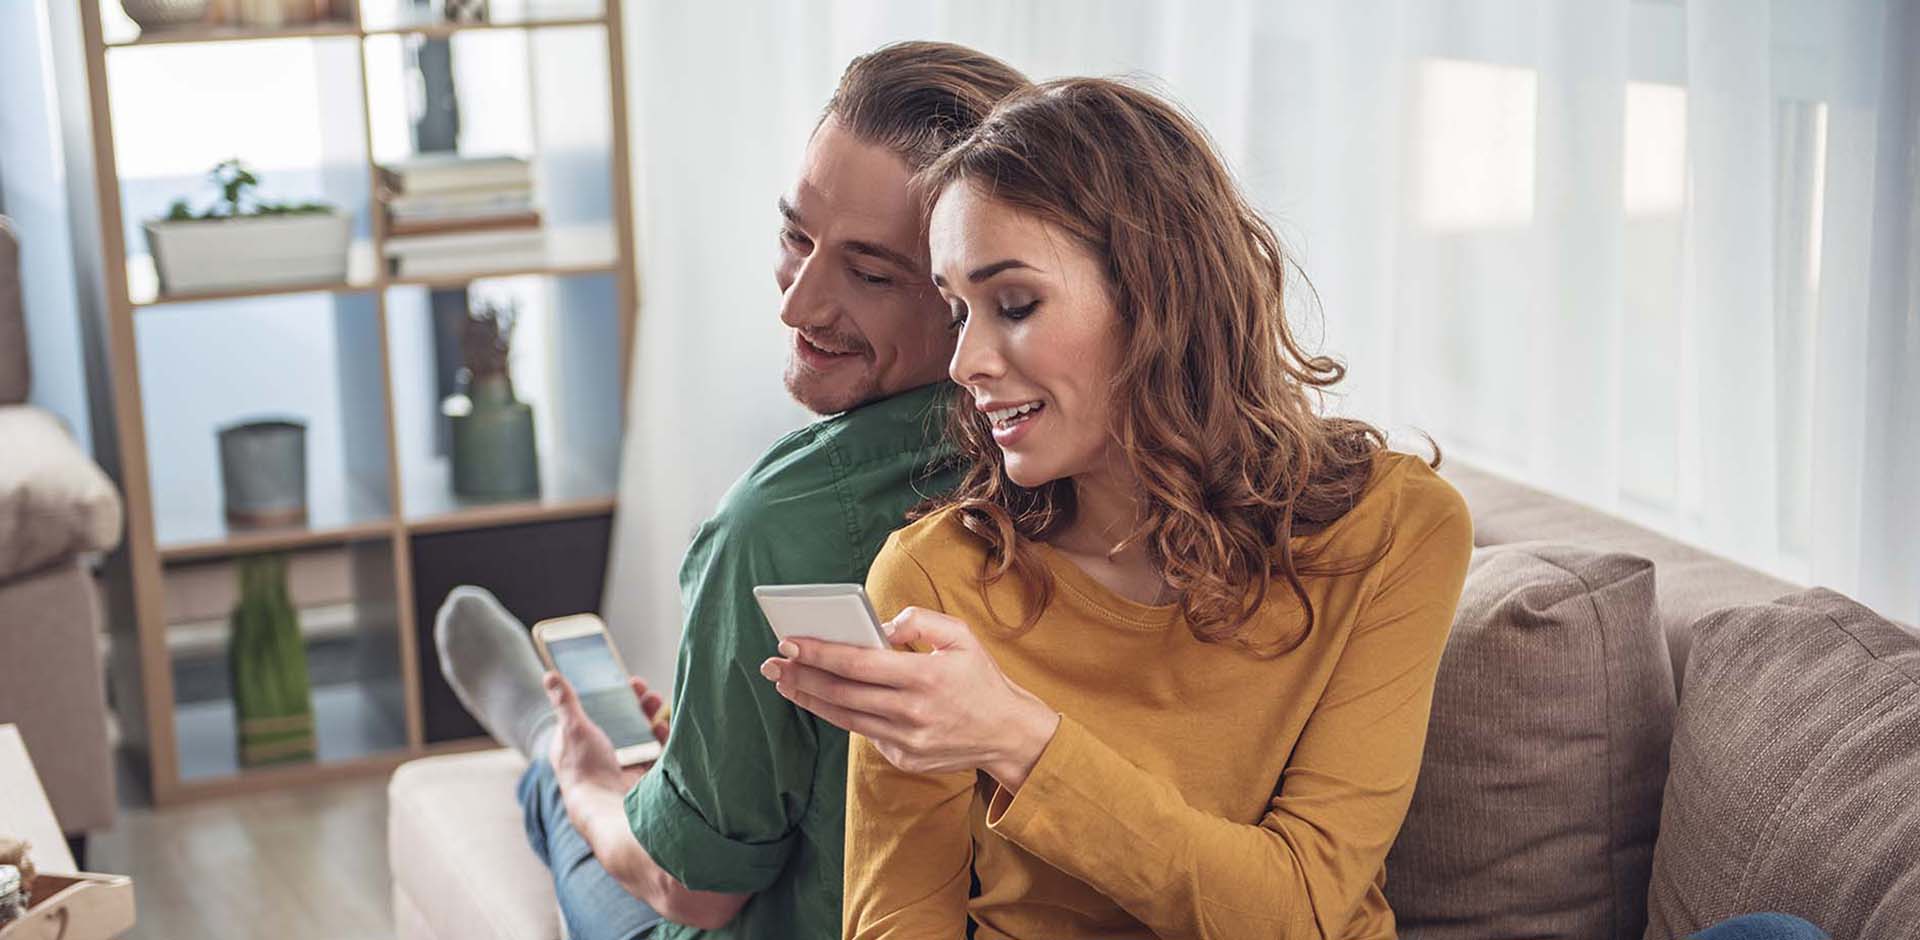  A smiling couple is looking at their mobile phones  on a sofa.